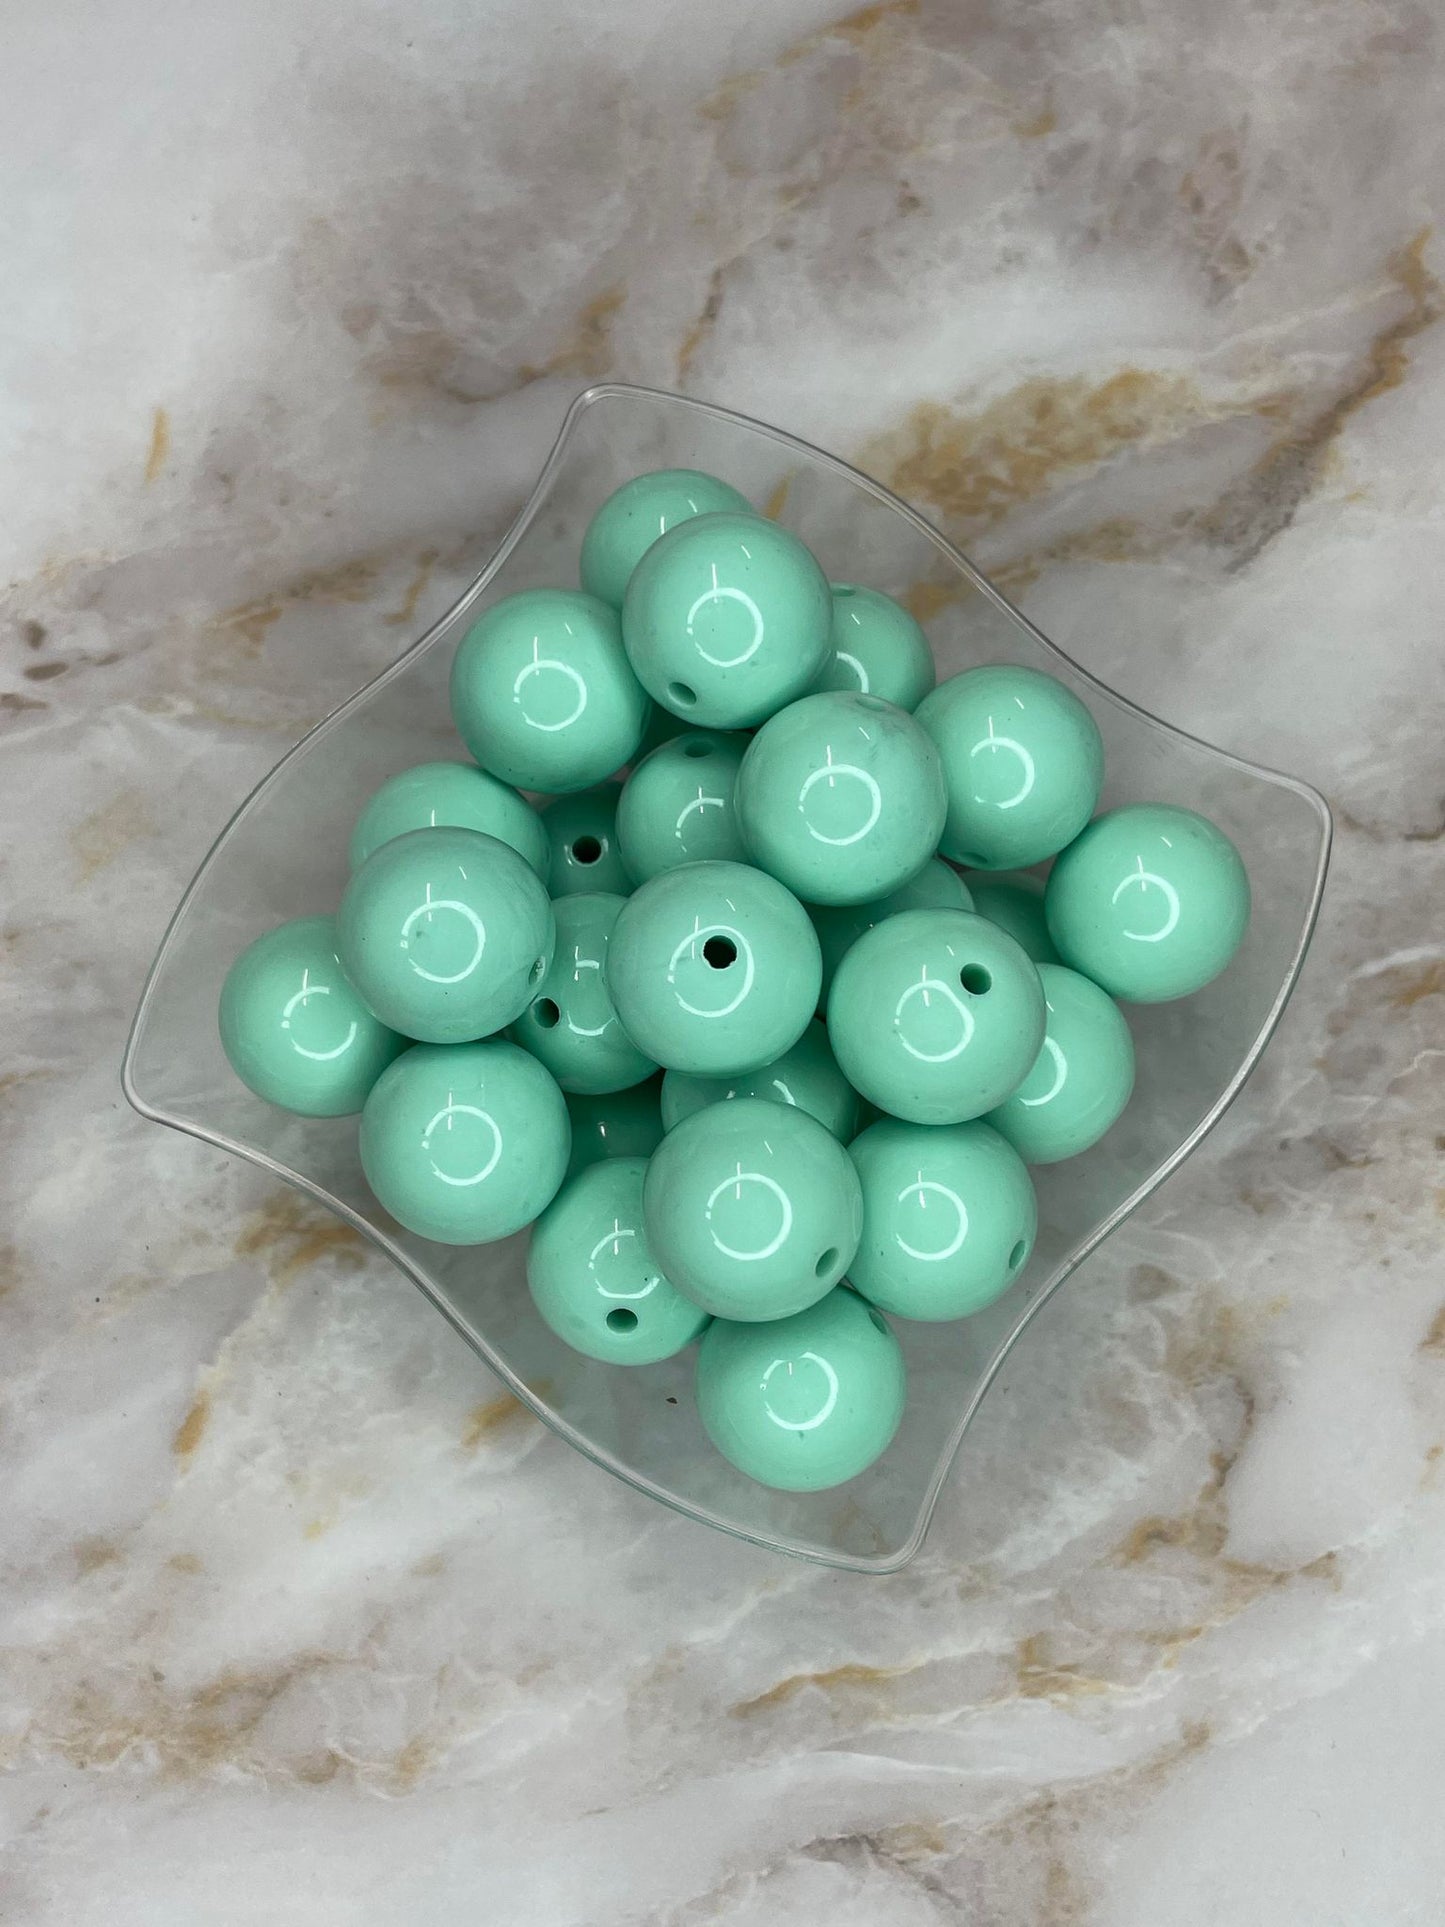 **DISCONTINUED** 20MM SOLID ACRYLIC MINT